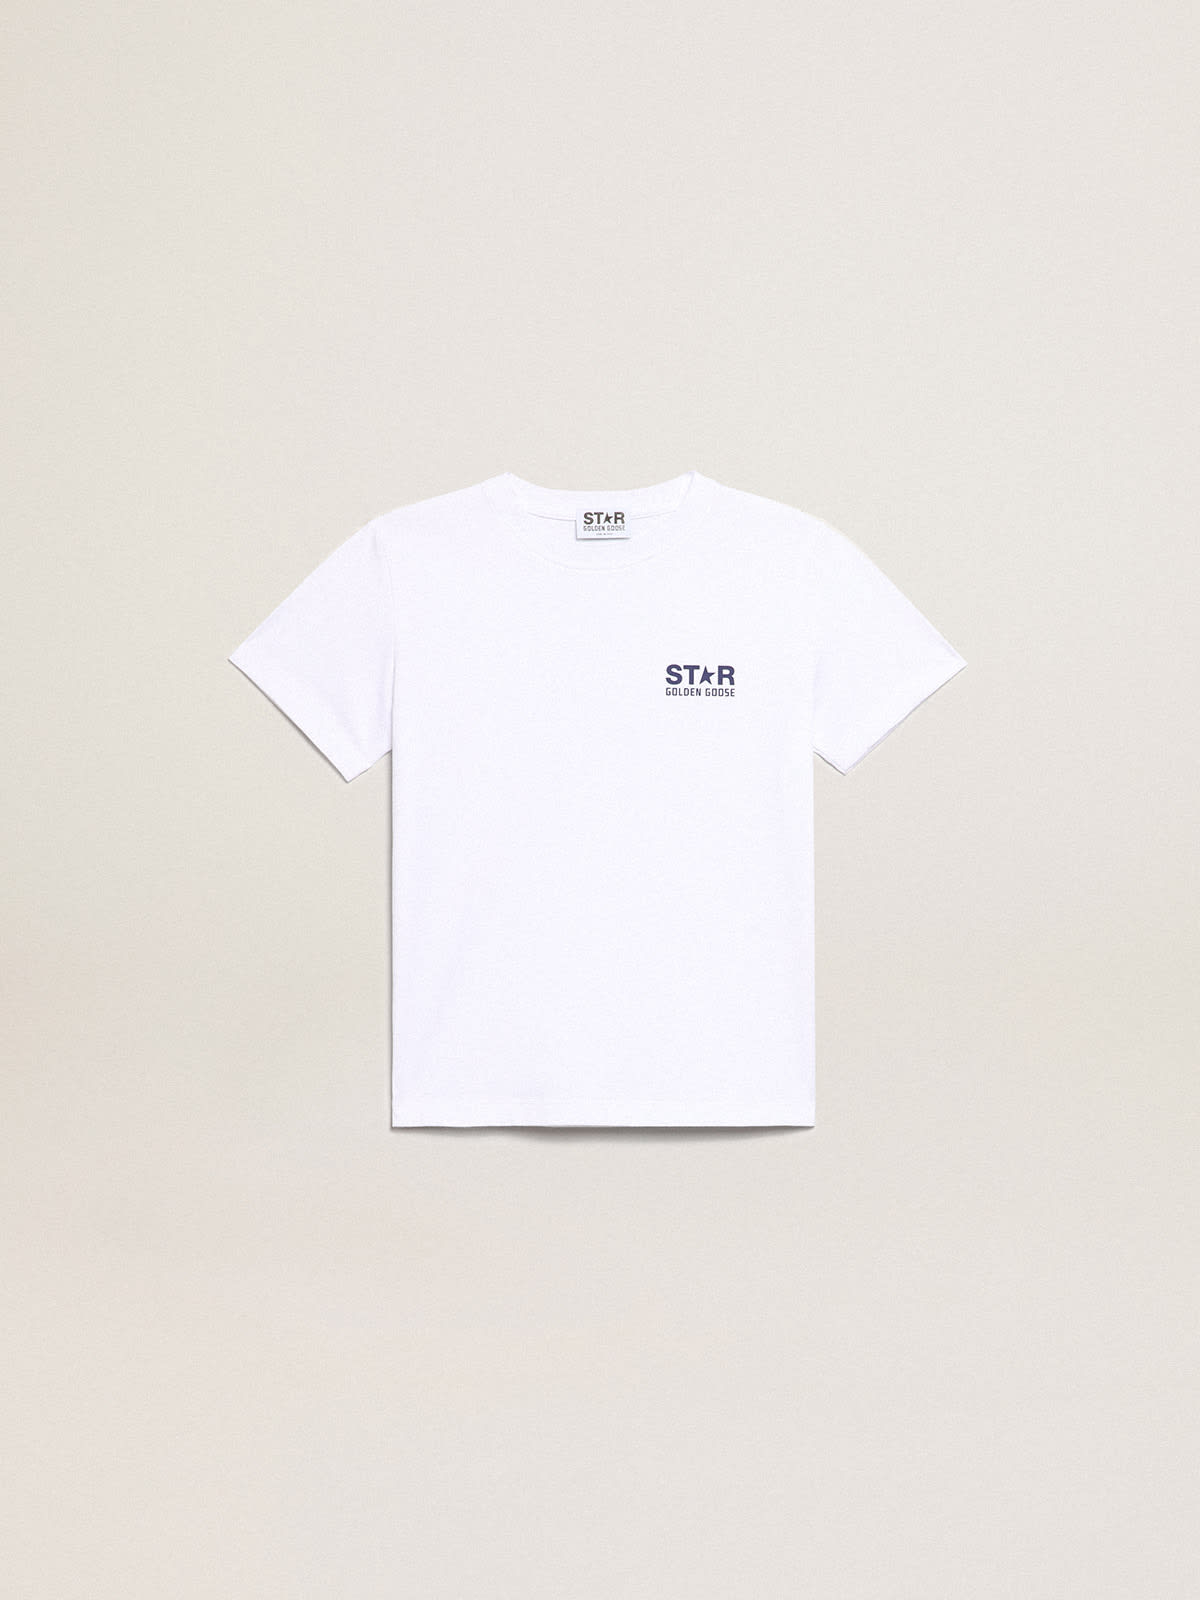 Golden Goose - Boys’ white T-shirt with contrasting dark blue logo and star in 